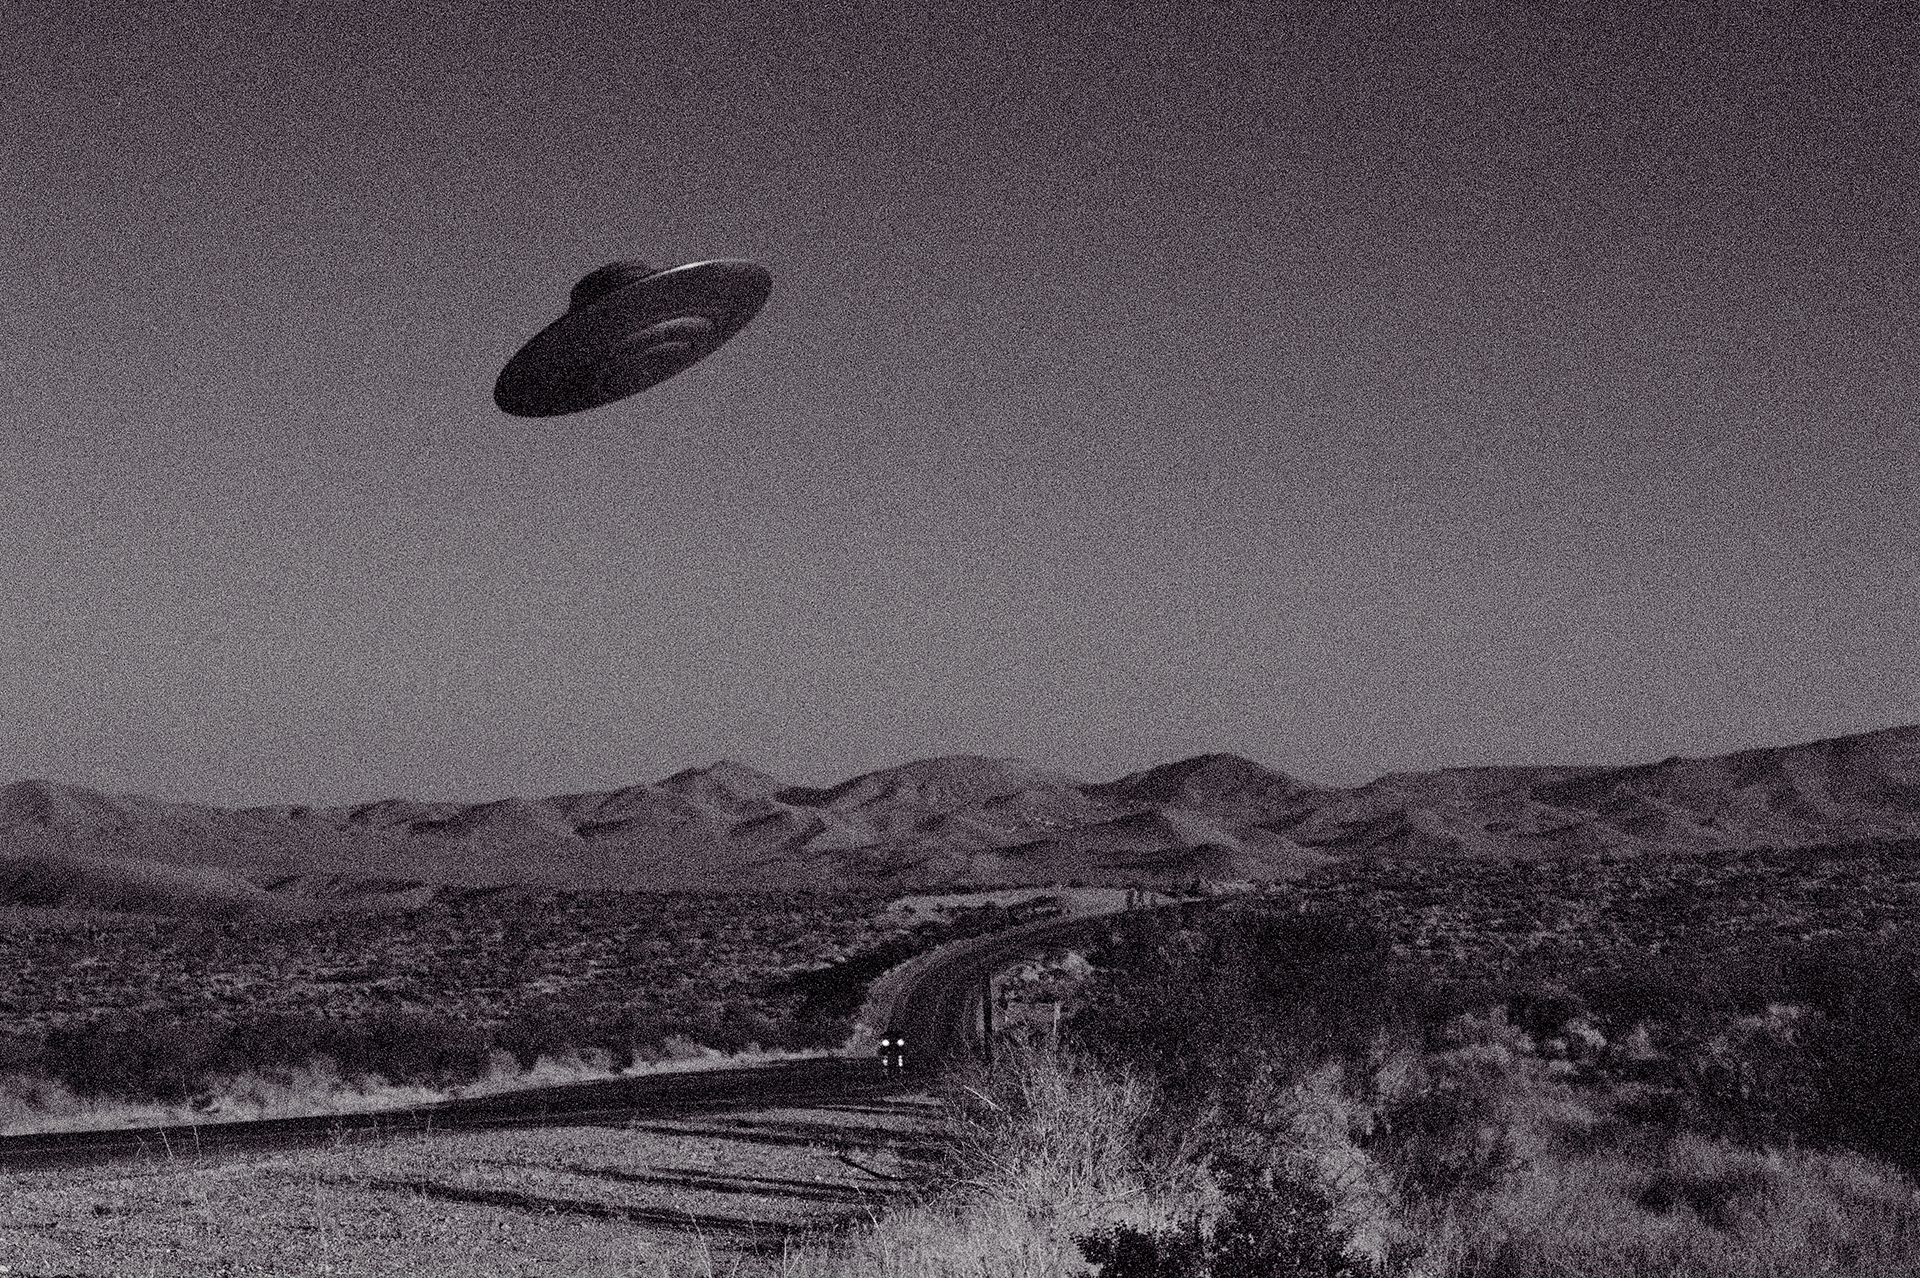 A black-and-white image of a flying saucer-shaped UFO suspended in the air above an arid, hilly landscape.